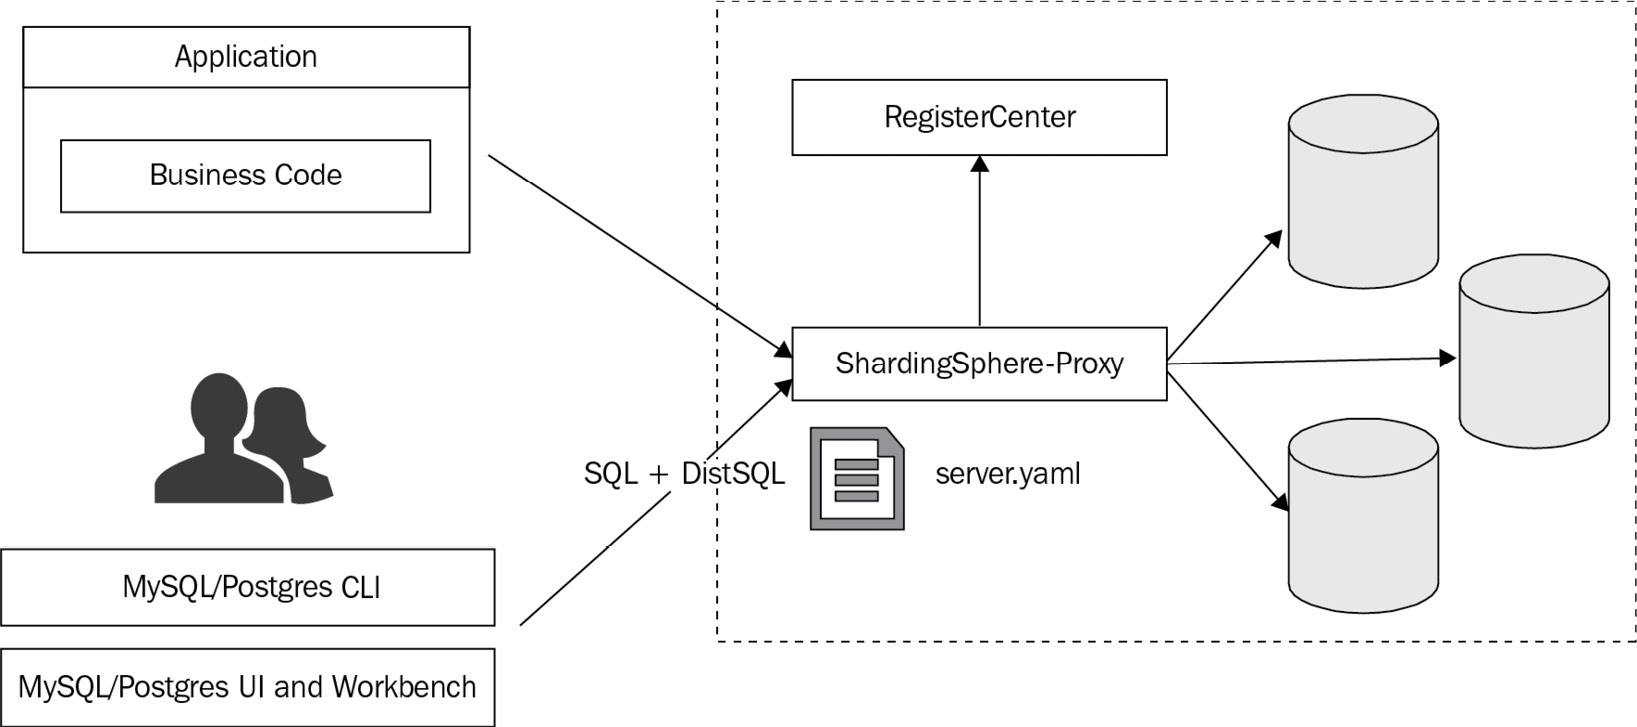 Figure 4.11 – The application system including DistSQL
